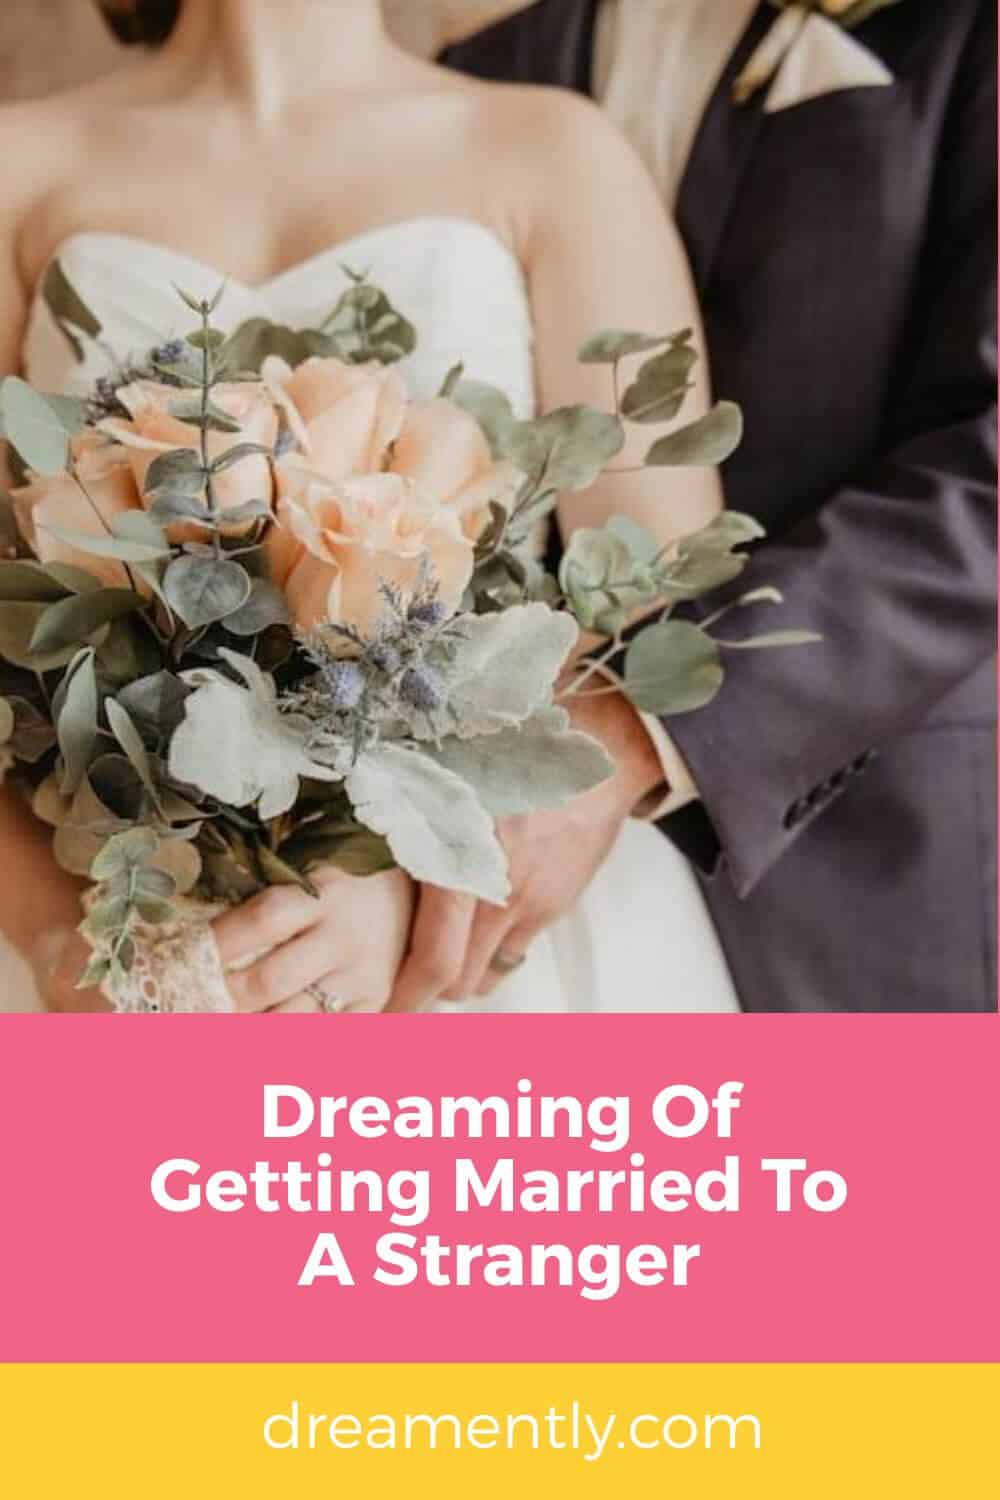 Dreaming Of Getting Married To A Stranger